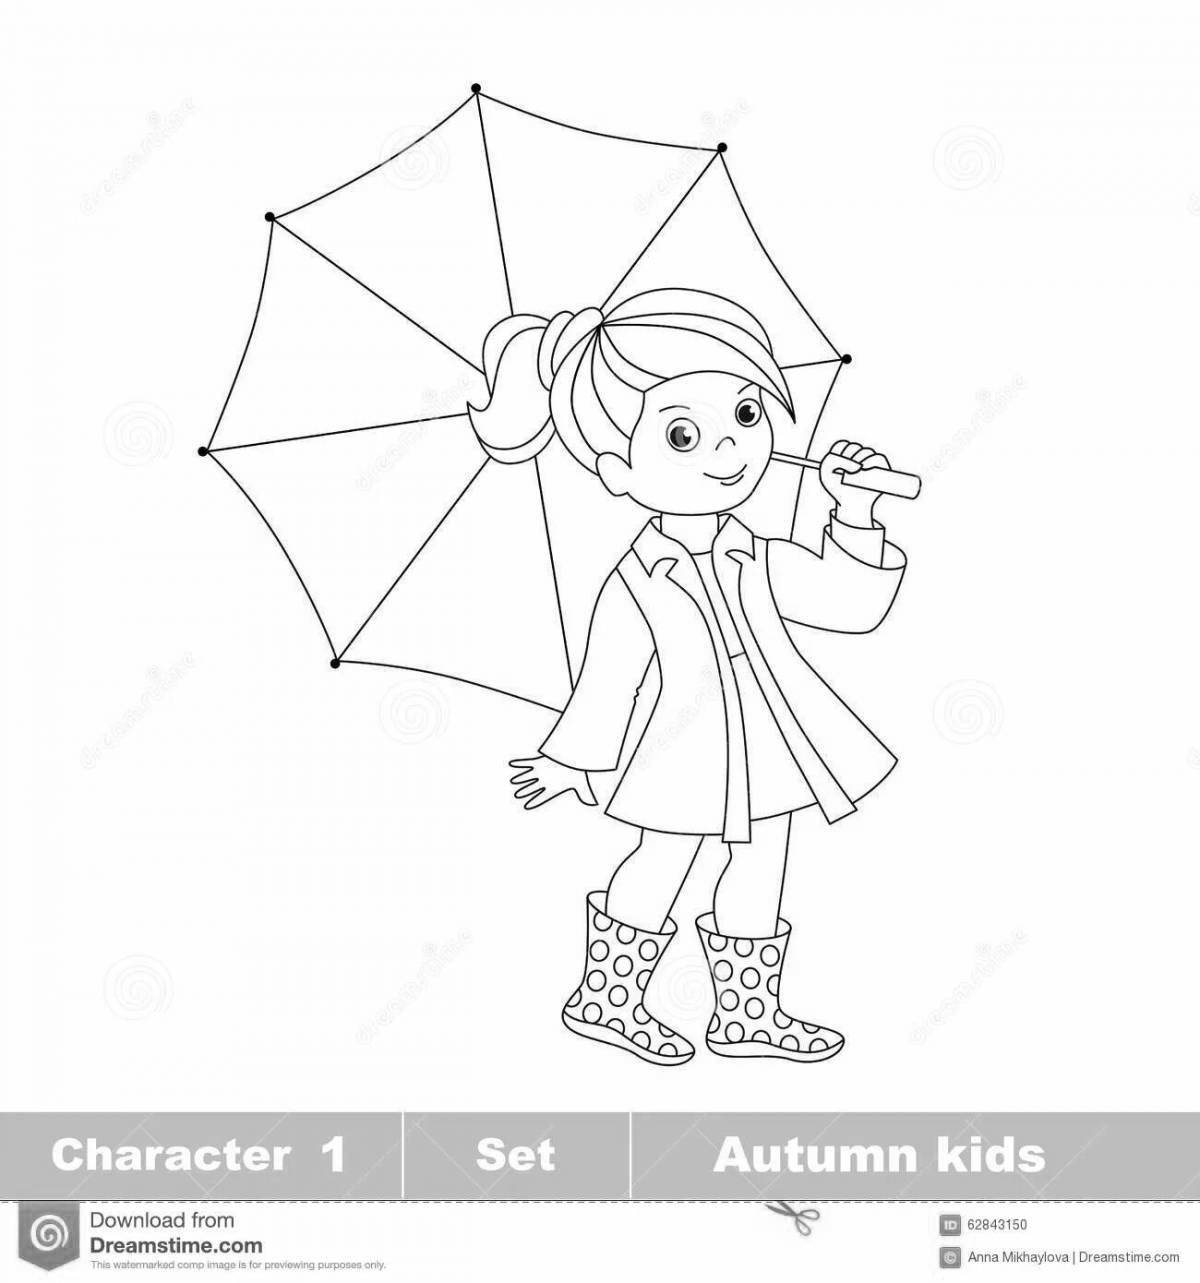 Sparkling coloring girl with umbrella